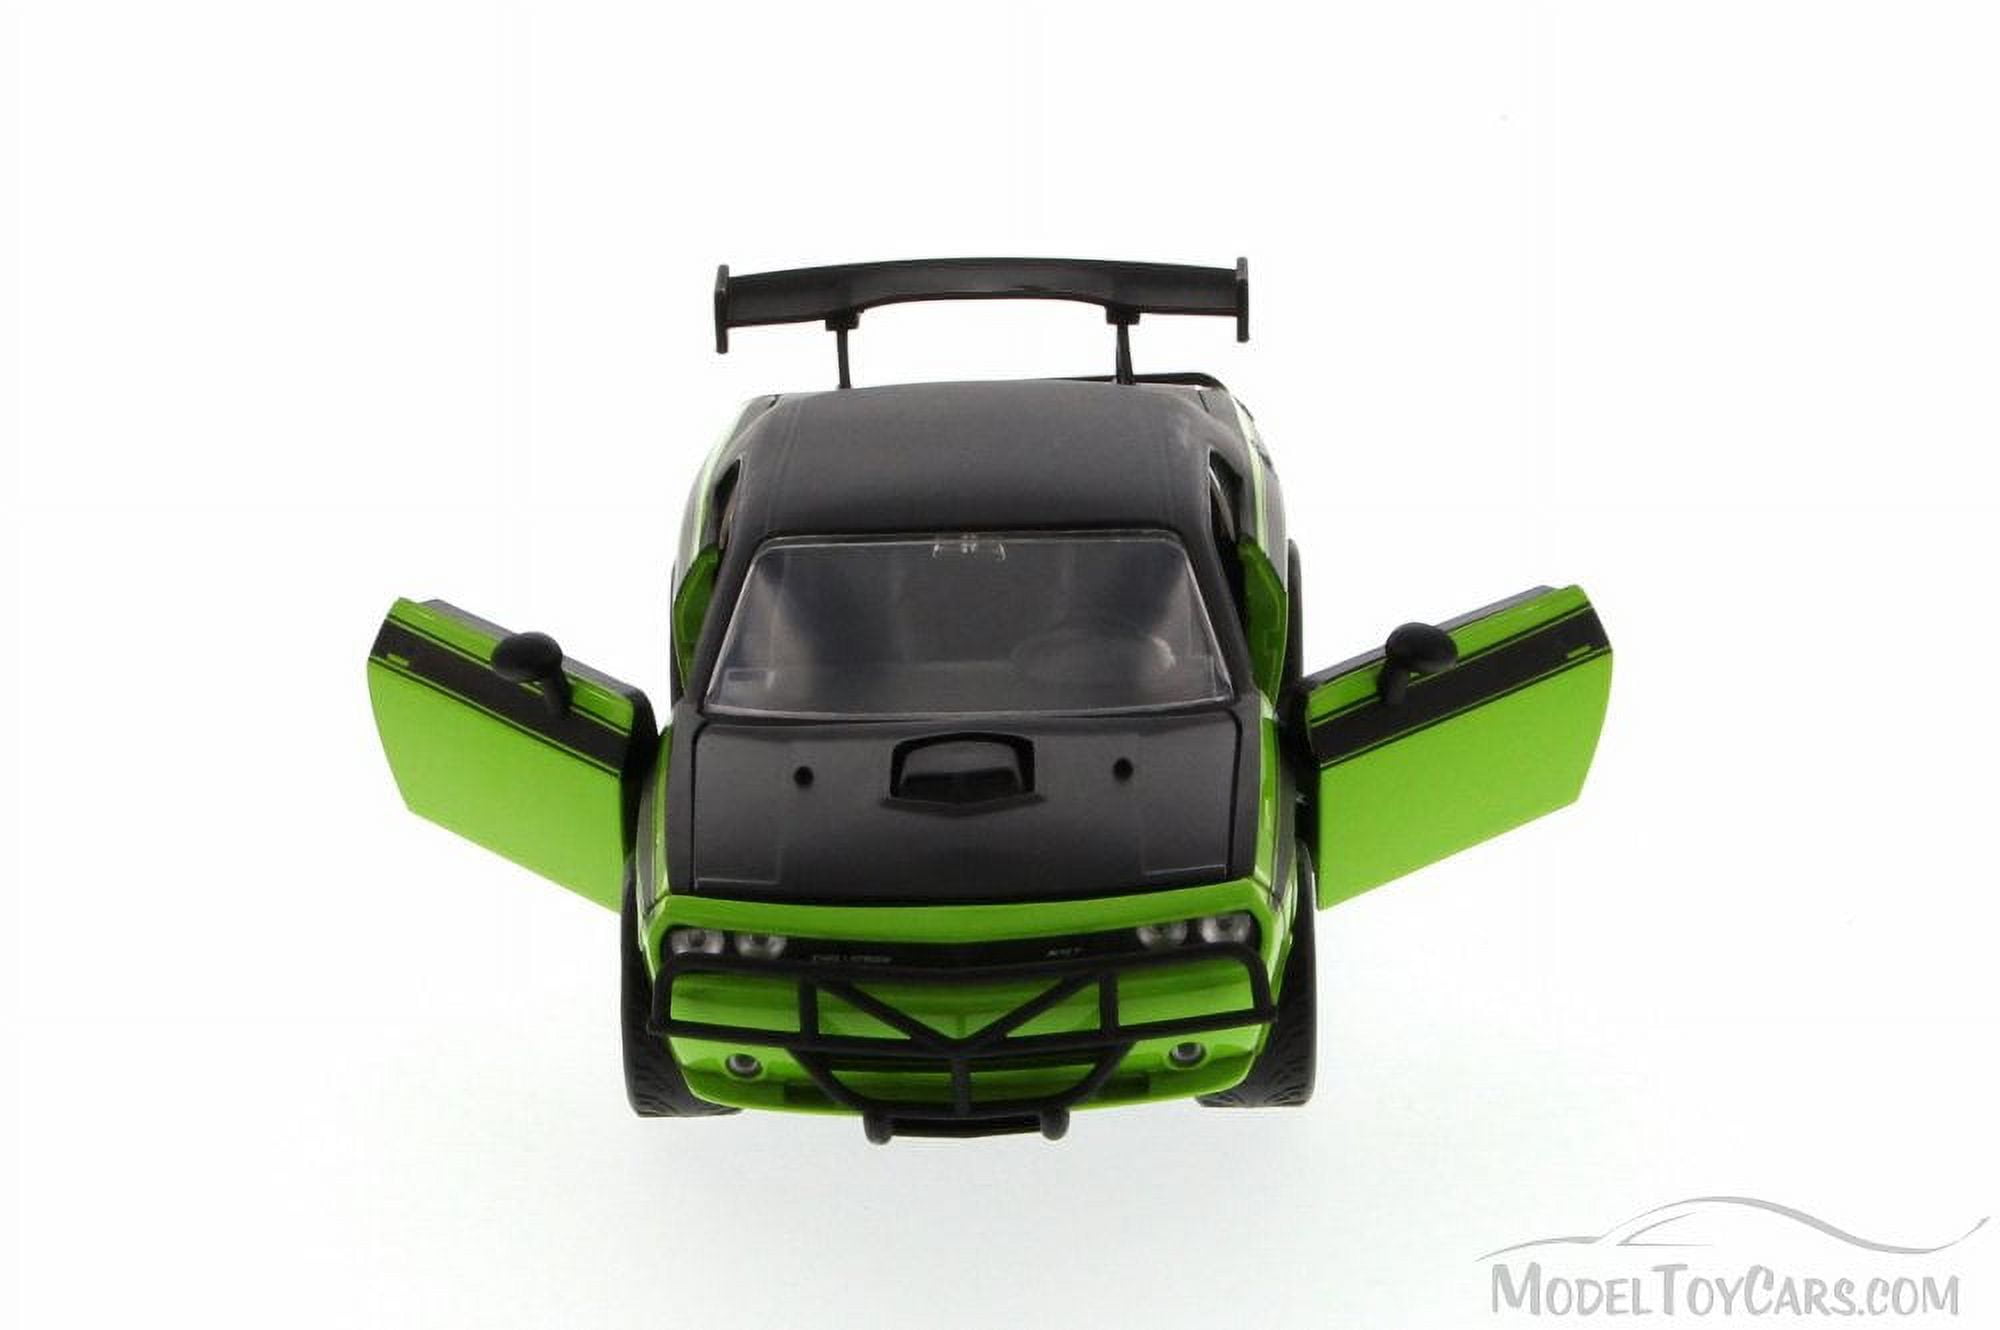 Fast & Furious Letty's 2011 Dodge Challenger SRT8 hard Top, Green